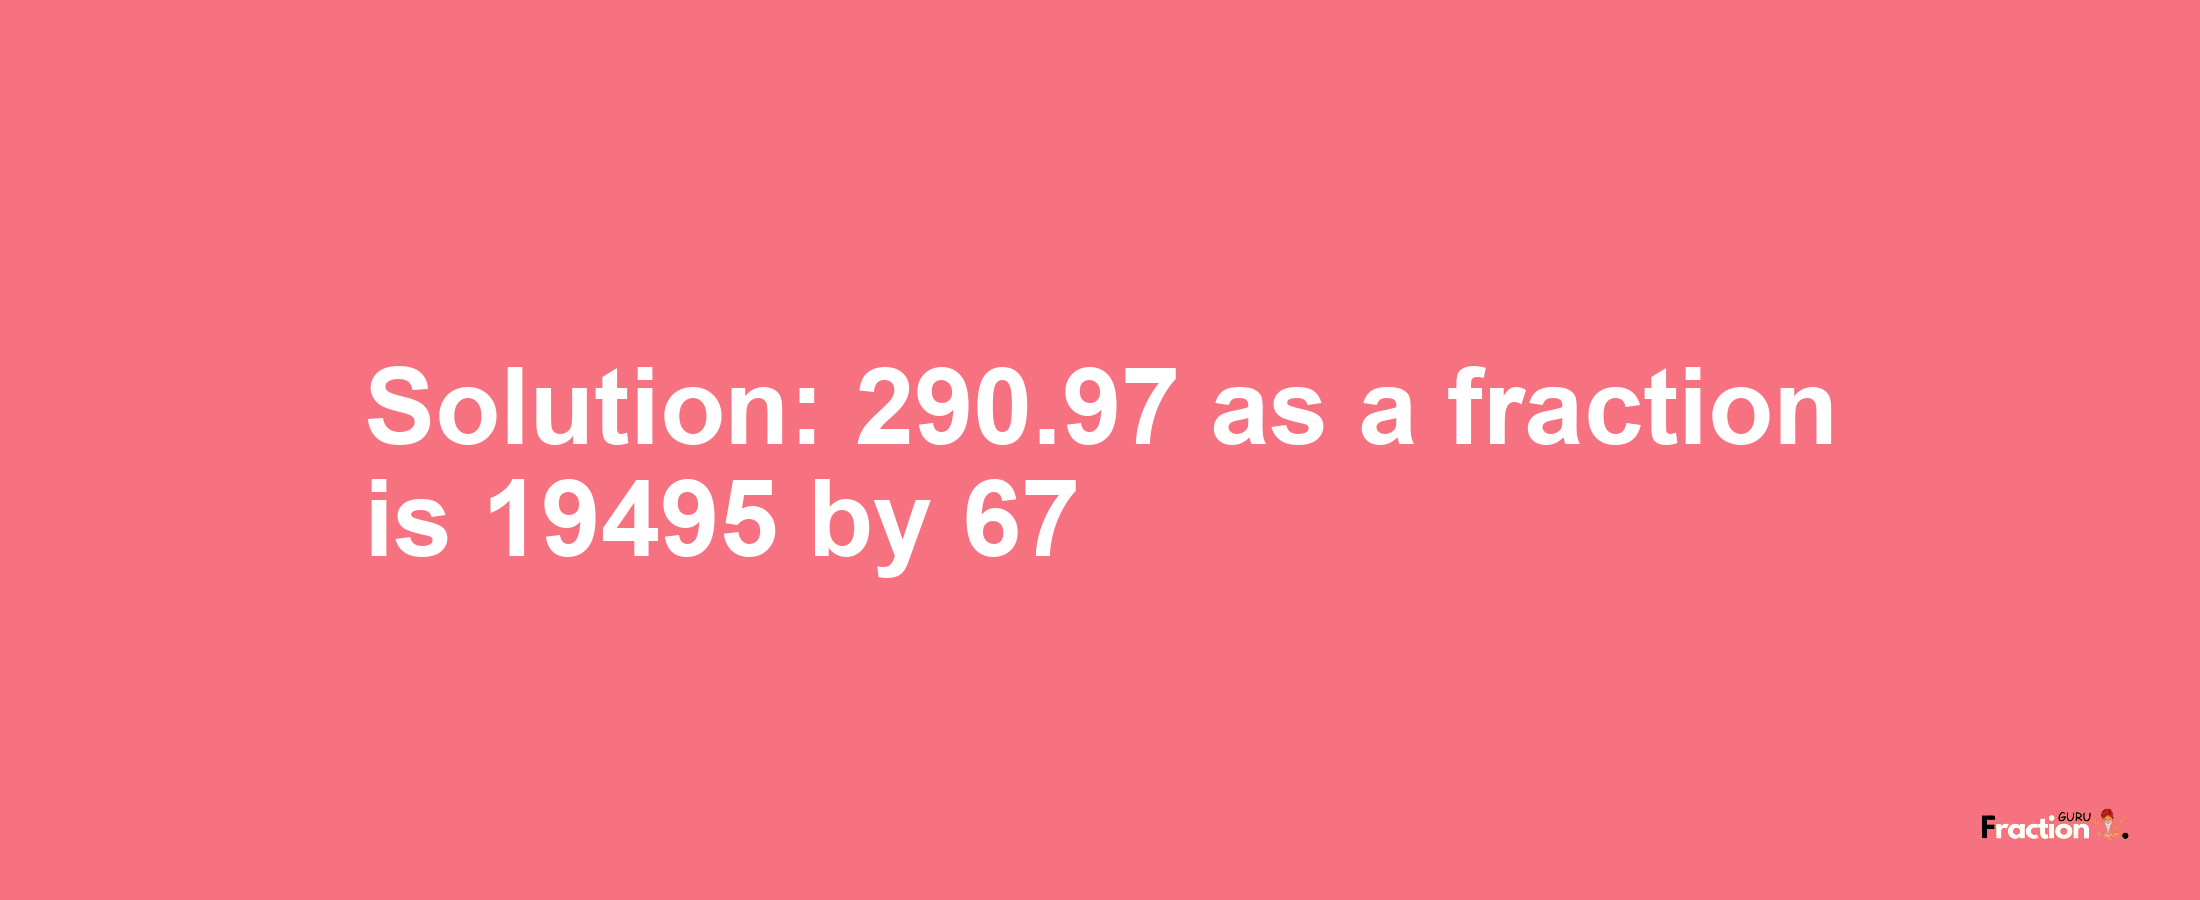 Solution:290.97 as a fraction is 19495/67